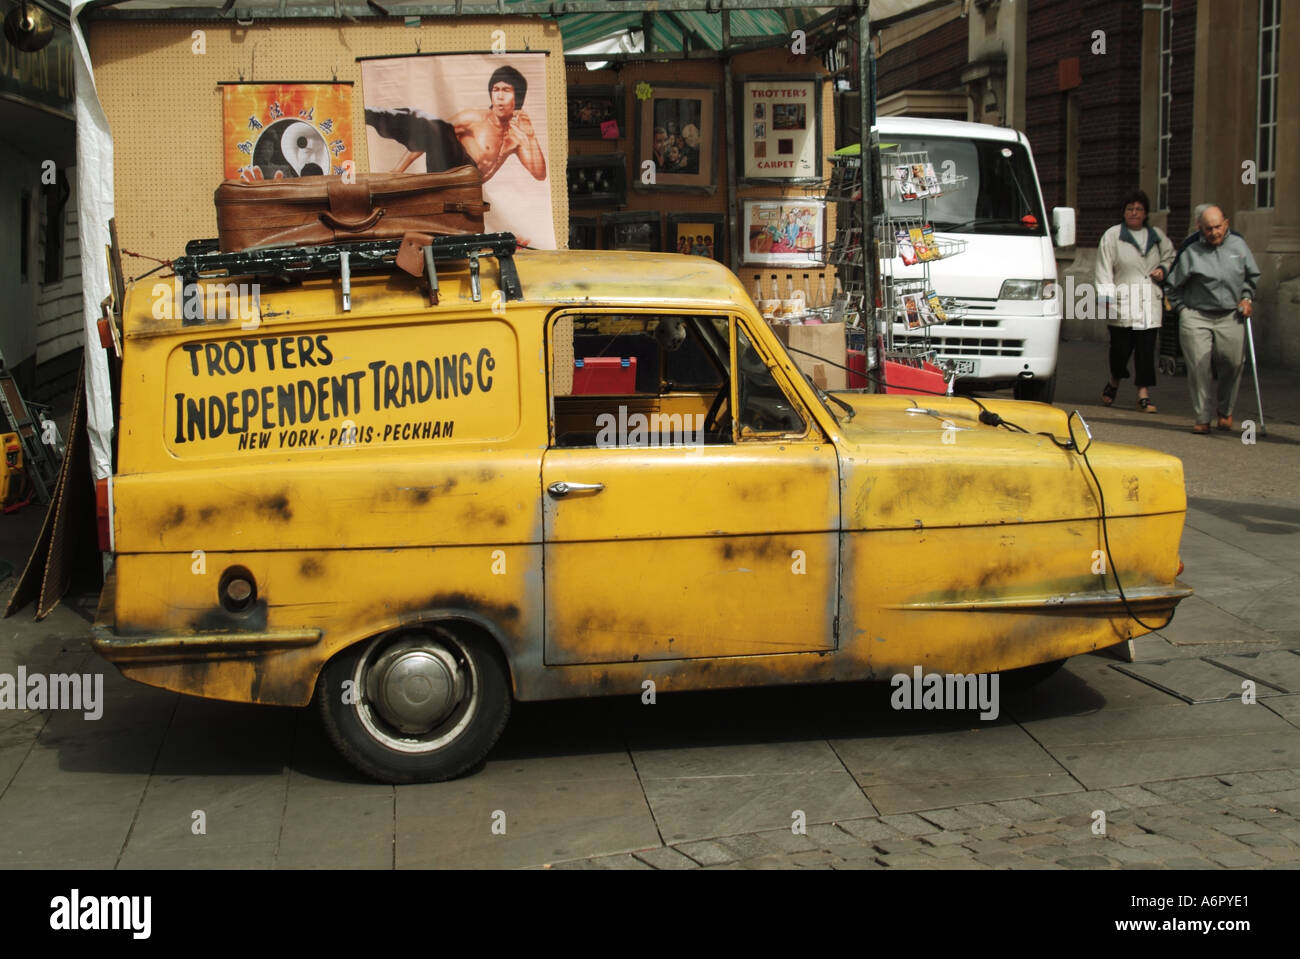 London market stall well worn reliant van sign written in similar style to that used in Only Fools & Horses classic television TV programme England UK Stock Photo